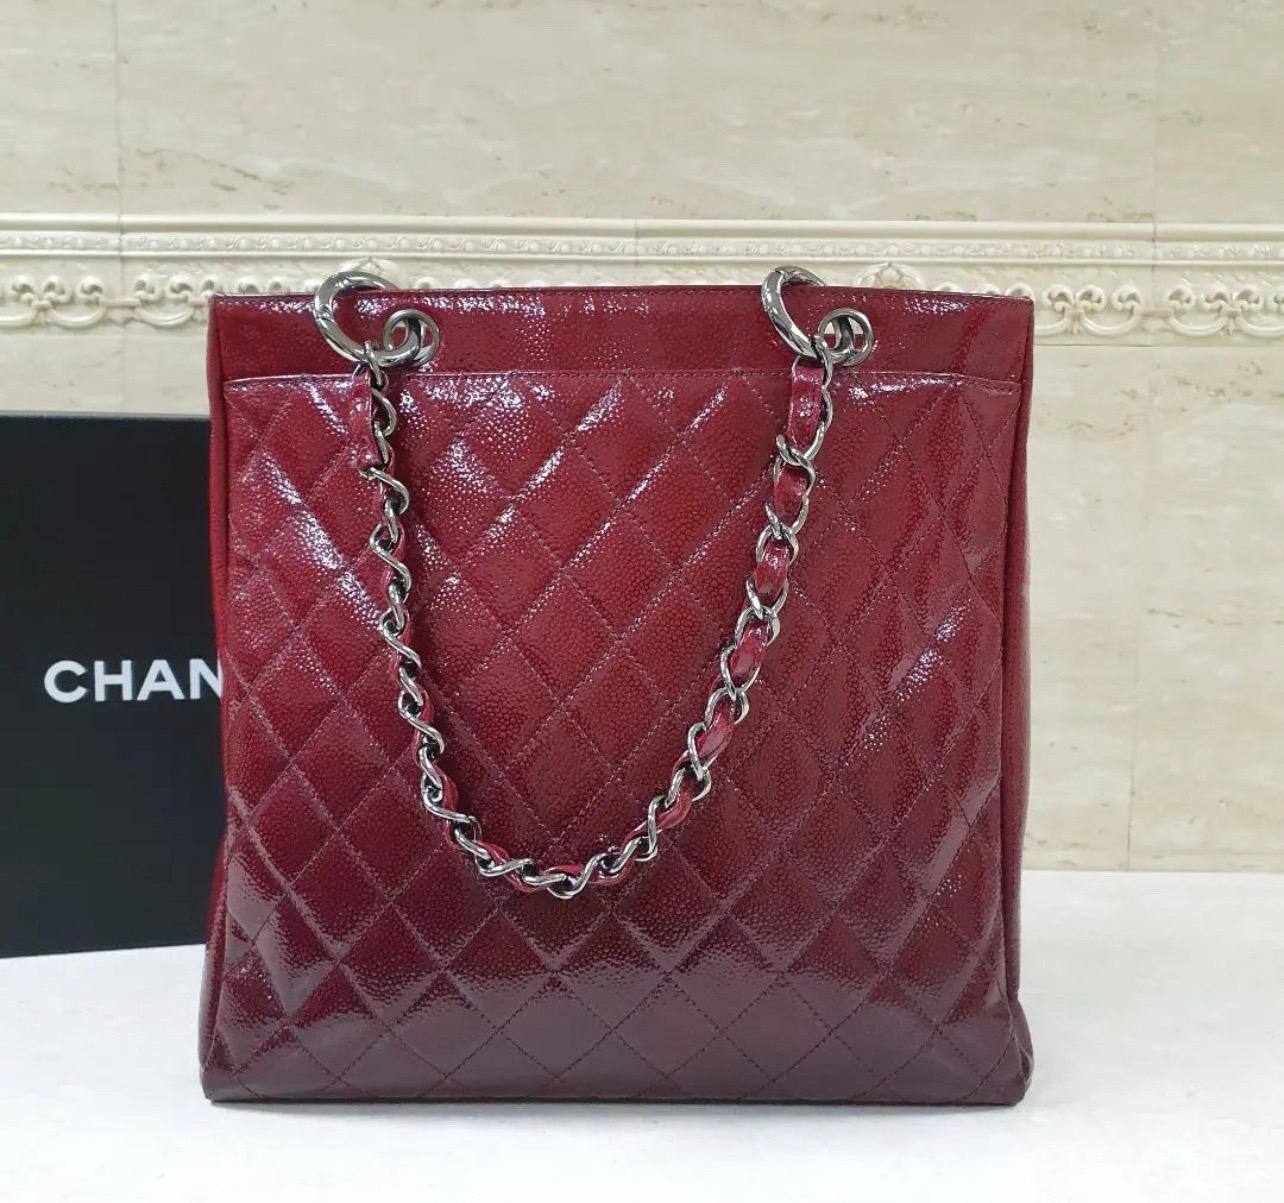 With dual interwoven chain-leather handles, this Chanel 2.55 Reissue bag will offer you an easy carrying experience. Made from burgundy ombré patent grained leather in a quilted pattern, it flaunts gunmetal-tone hardware and a turn-lock on the